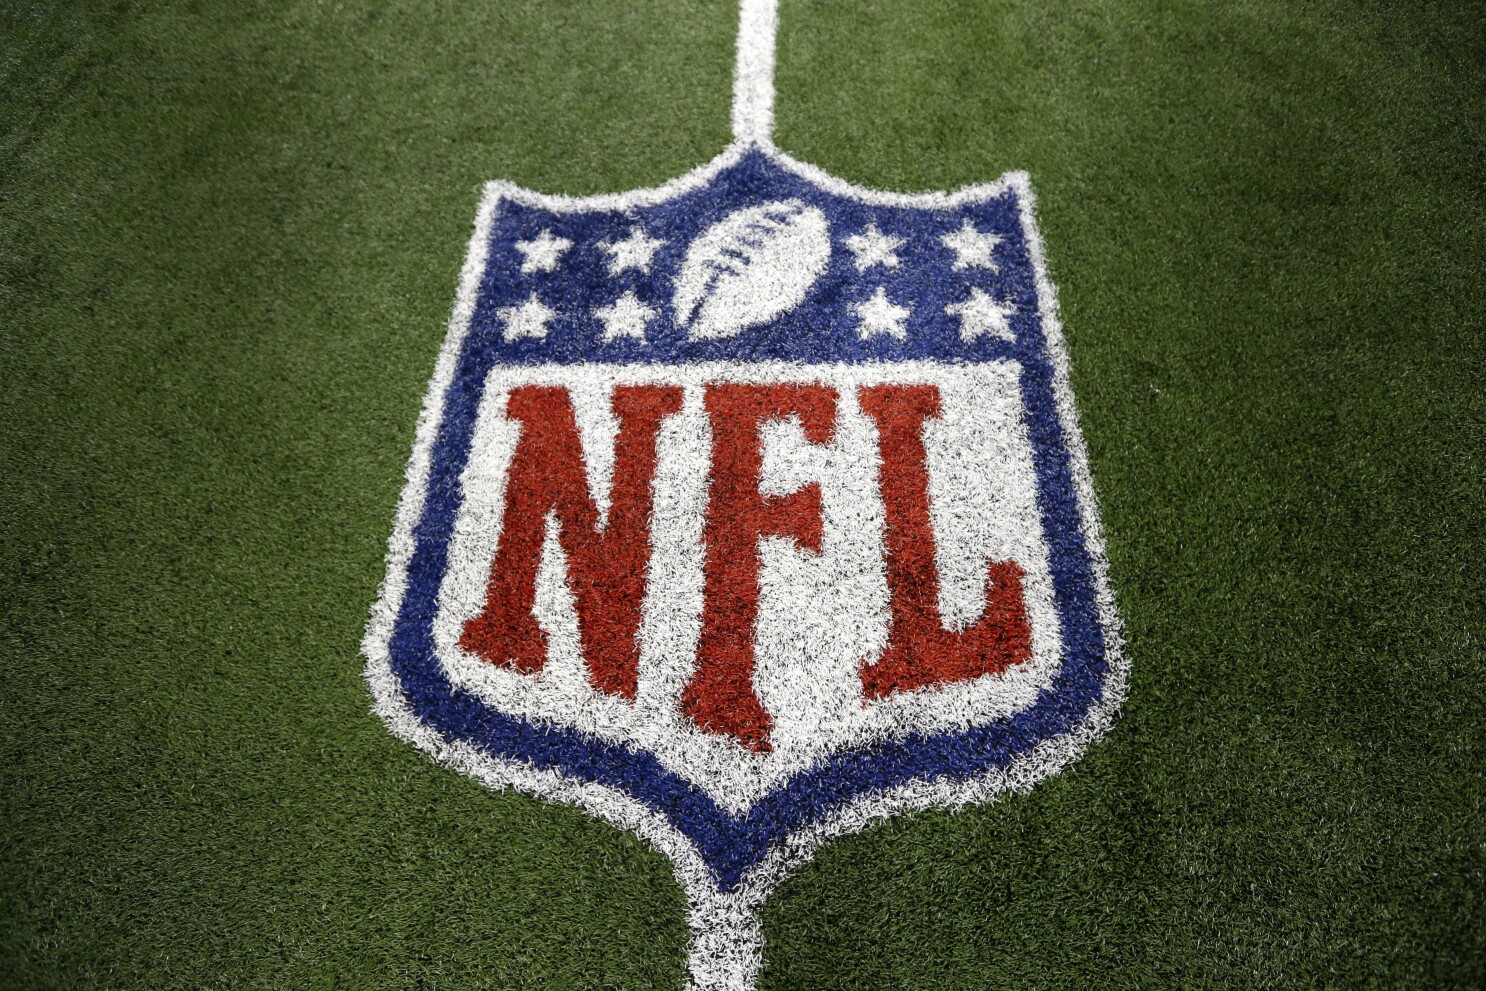 Reaches Deal for N.F.L Sunday Ticket - The New York Times